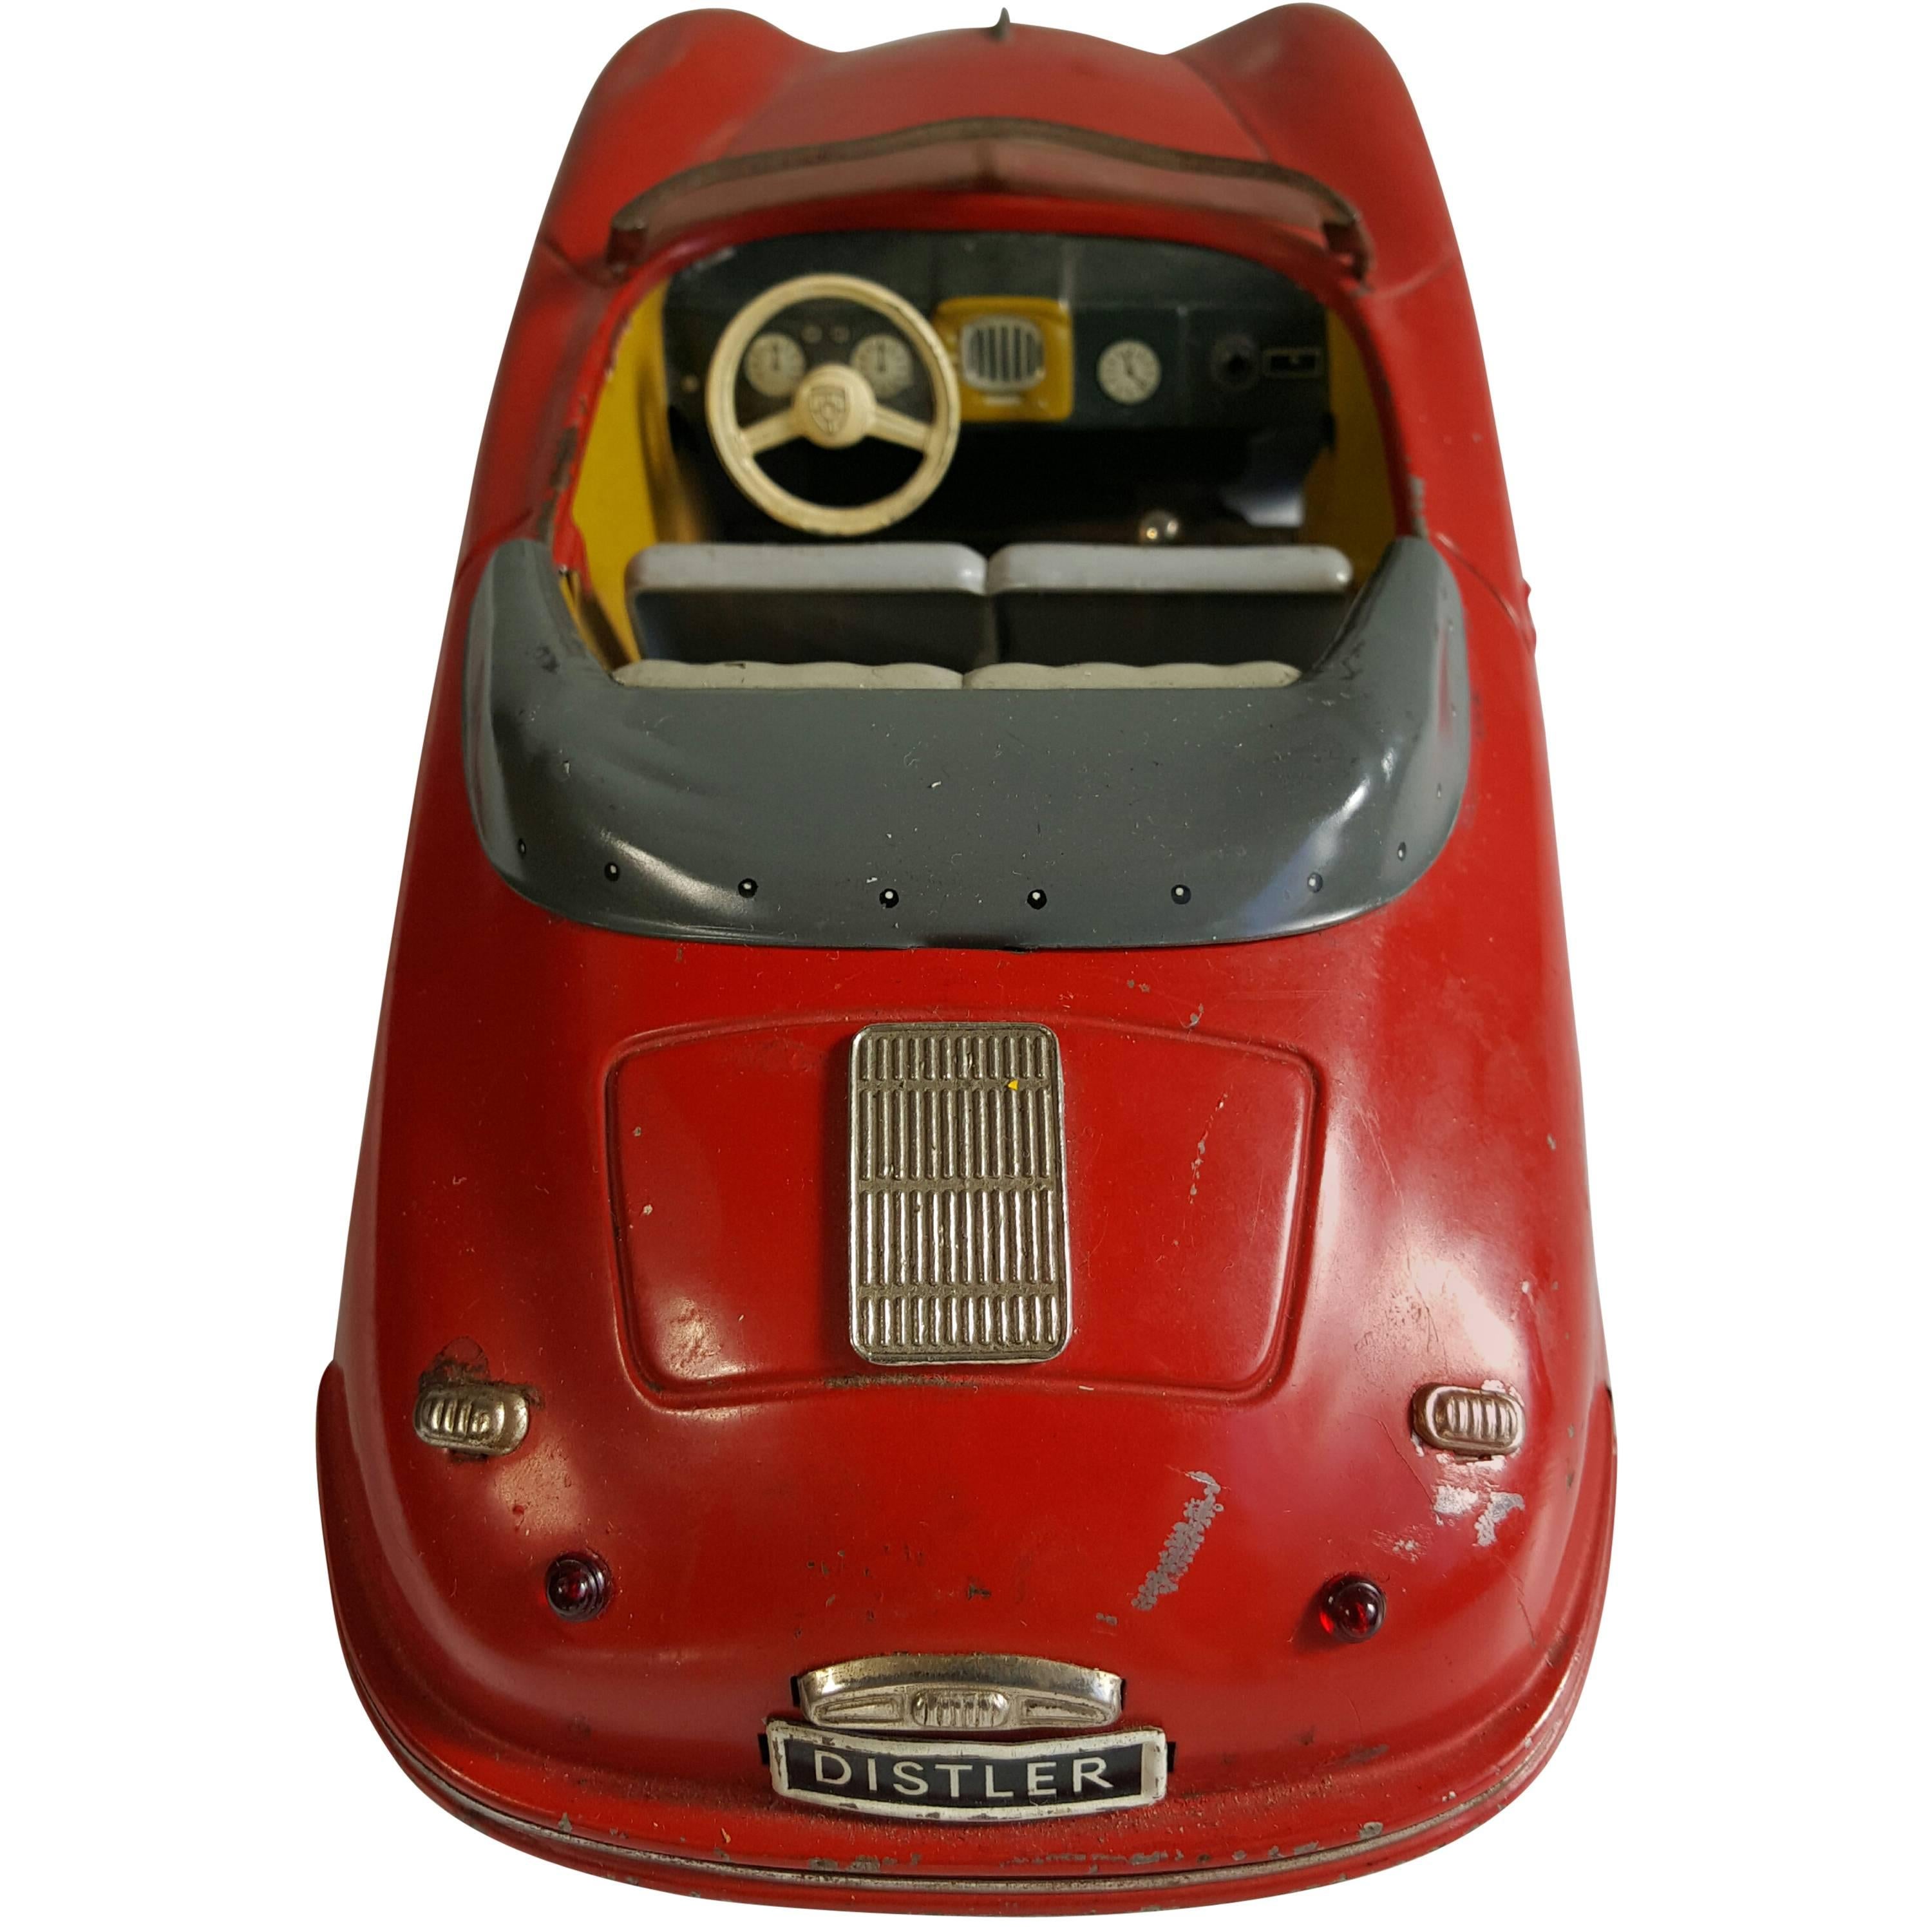 1950s Distler Porsche 356 Electromatic 7500 Germany Friction Toy